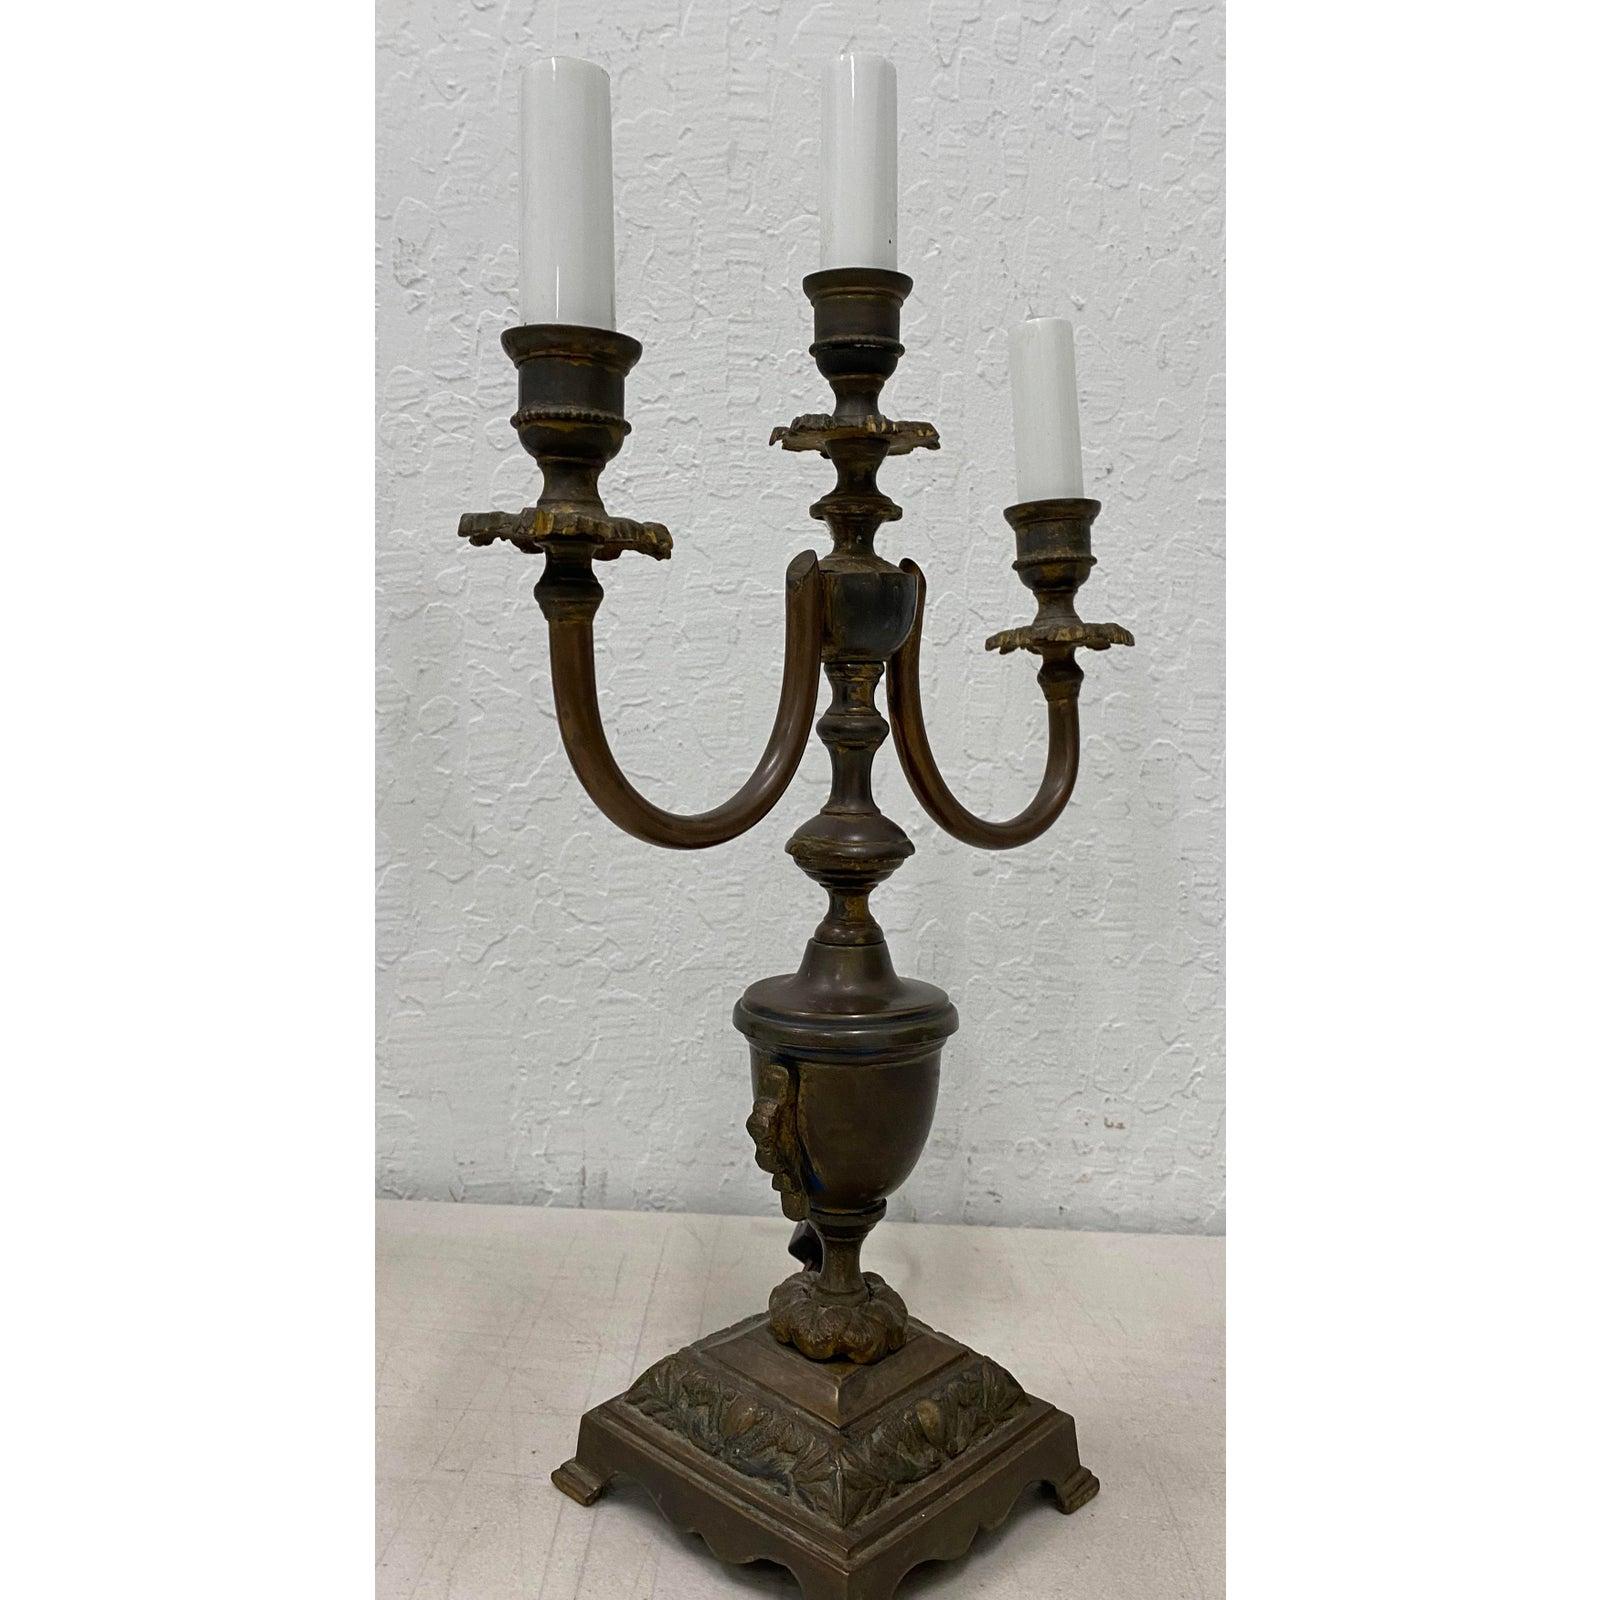 American Antique Patinated Brass Classical Urn Candelabras Converted to Table Lamps